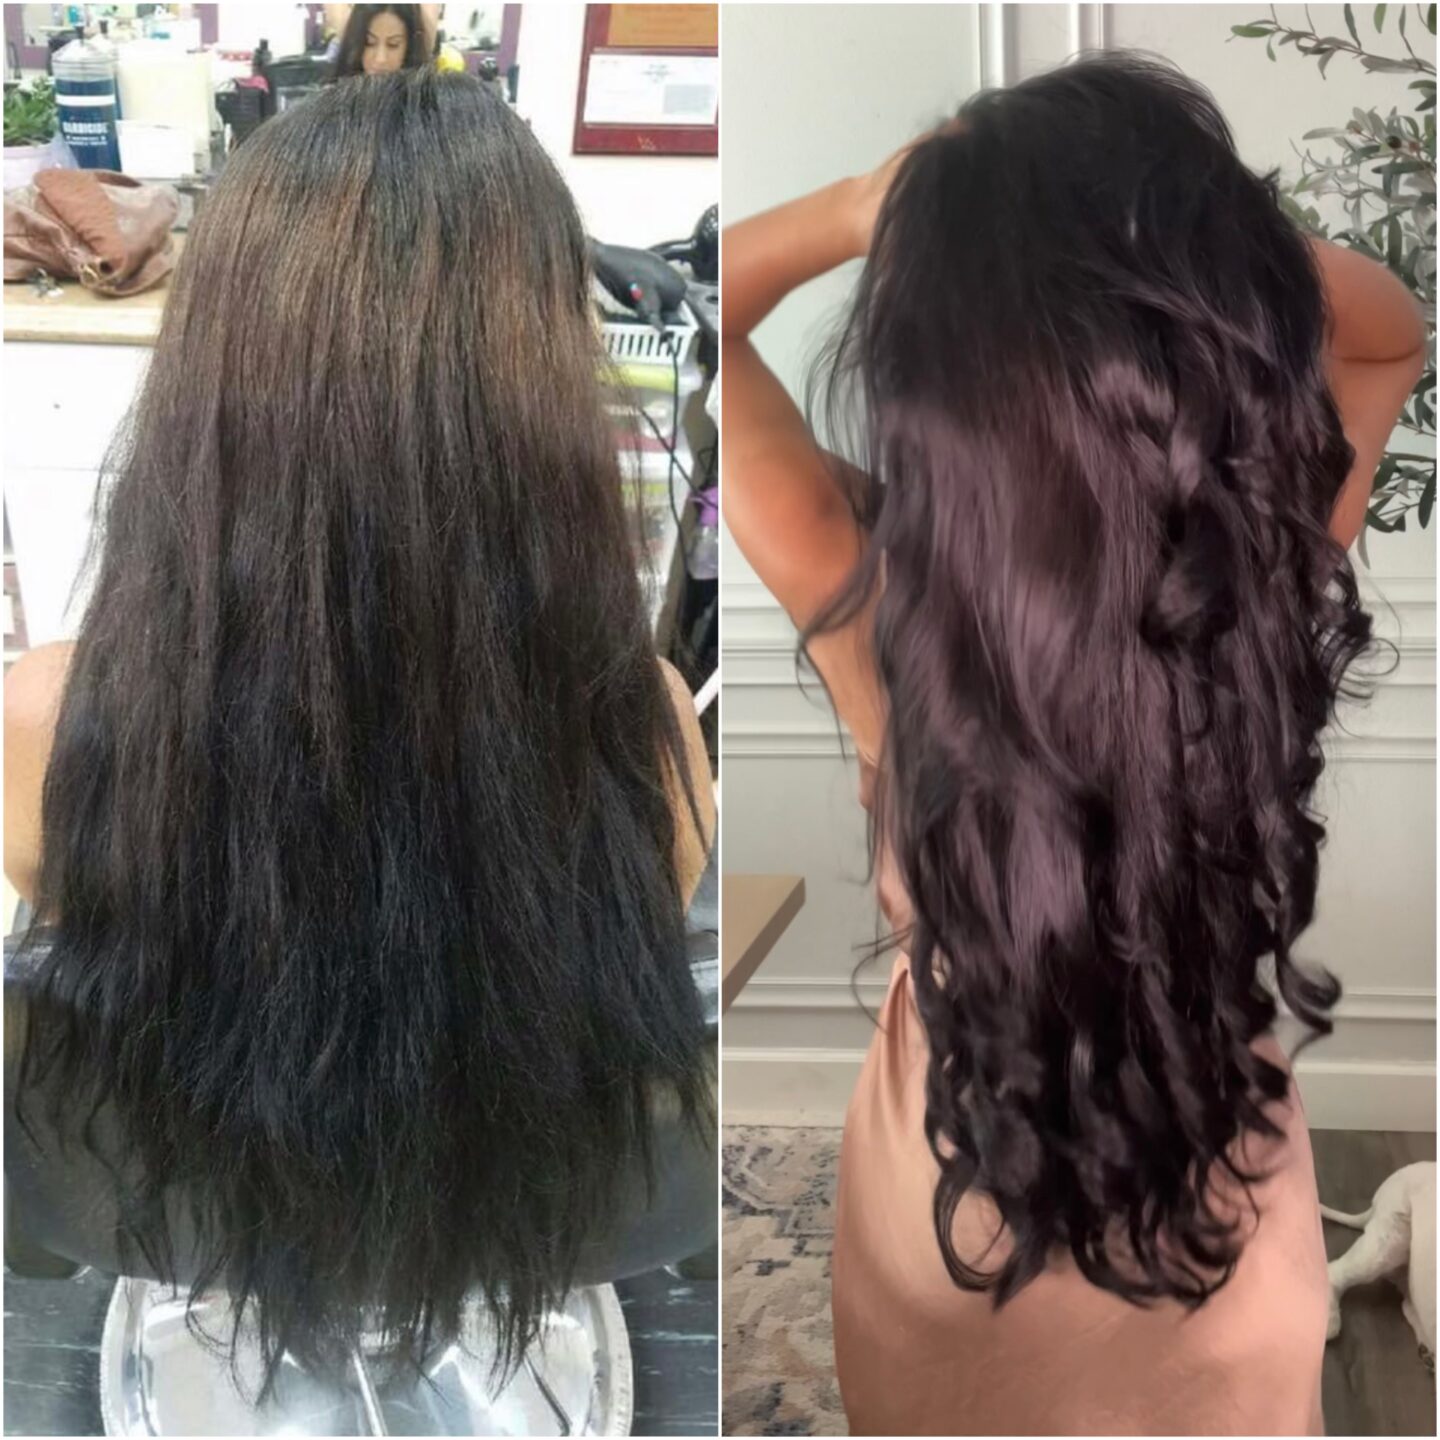 long damaged hair compared to long healthy hair